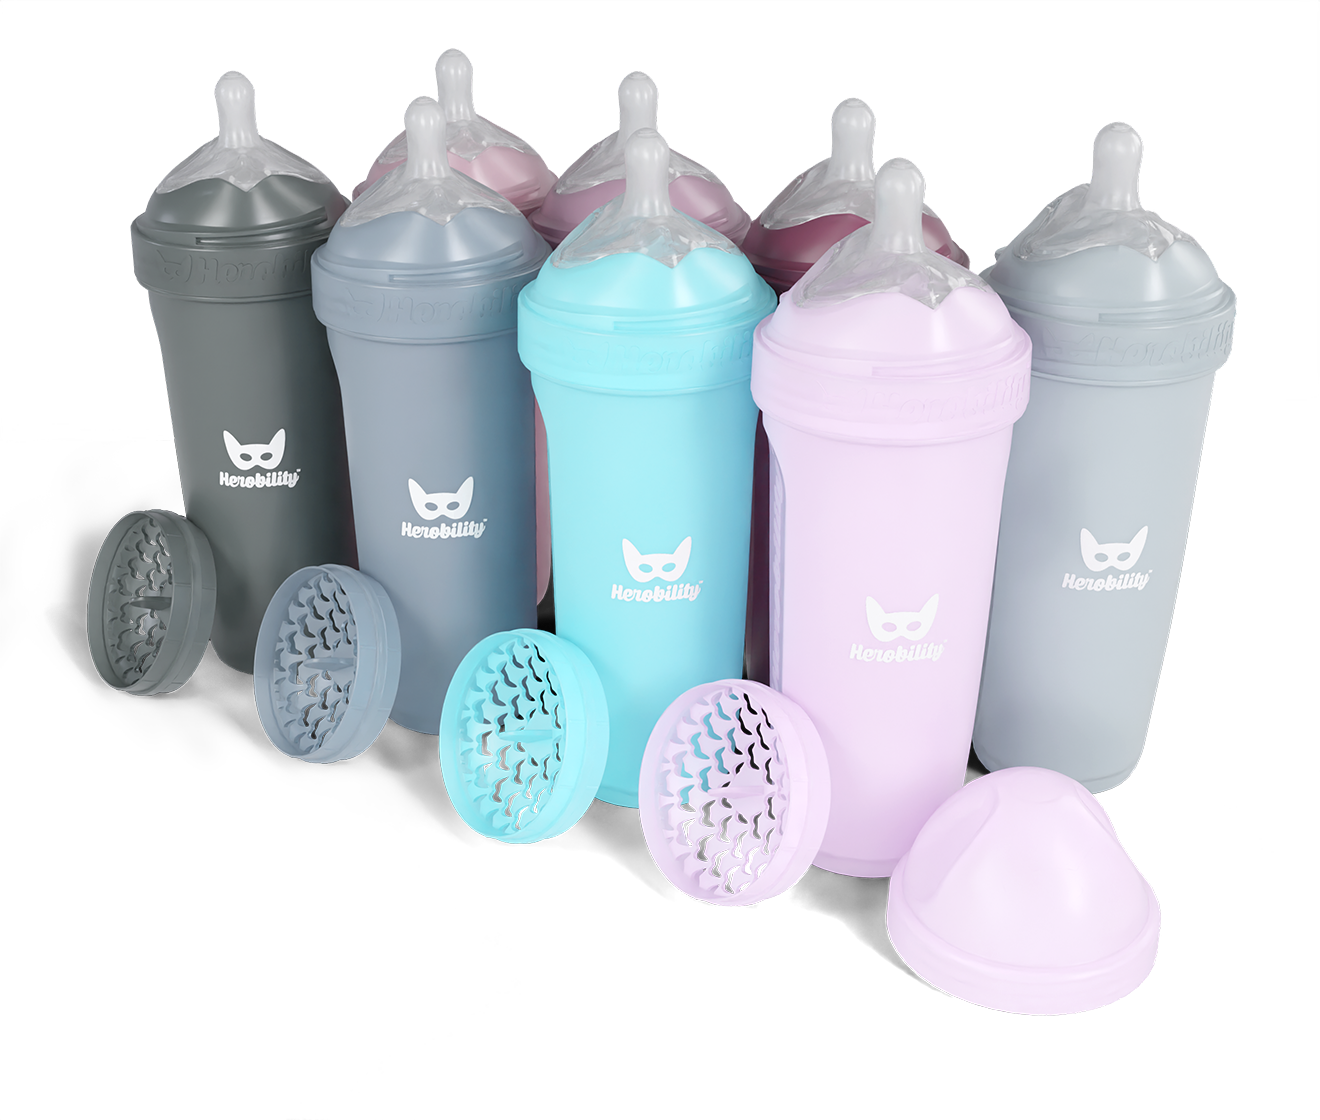 8-pack LT 340ml/12 floz Baby Bottles with 60% discount